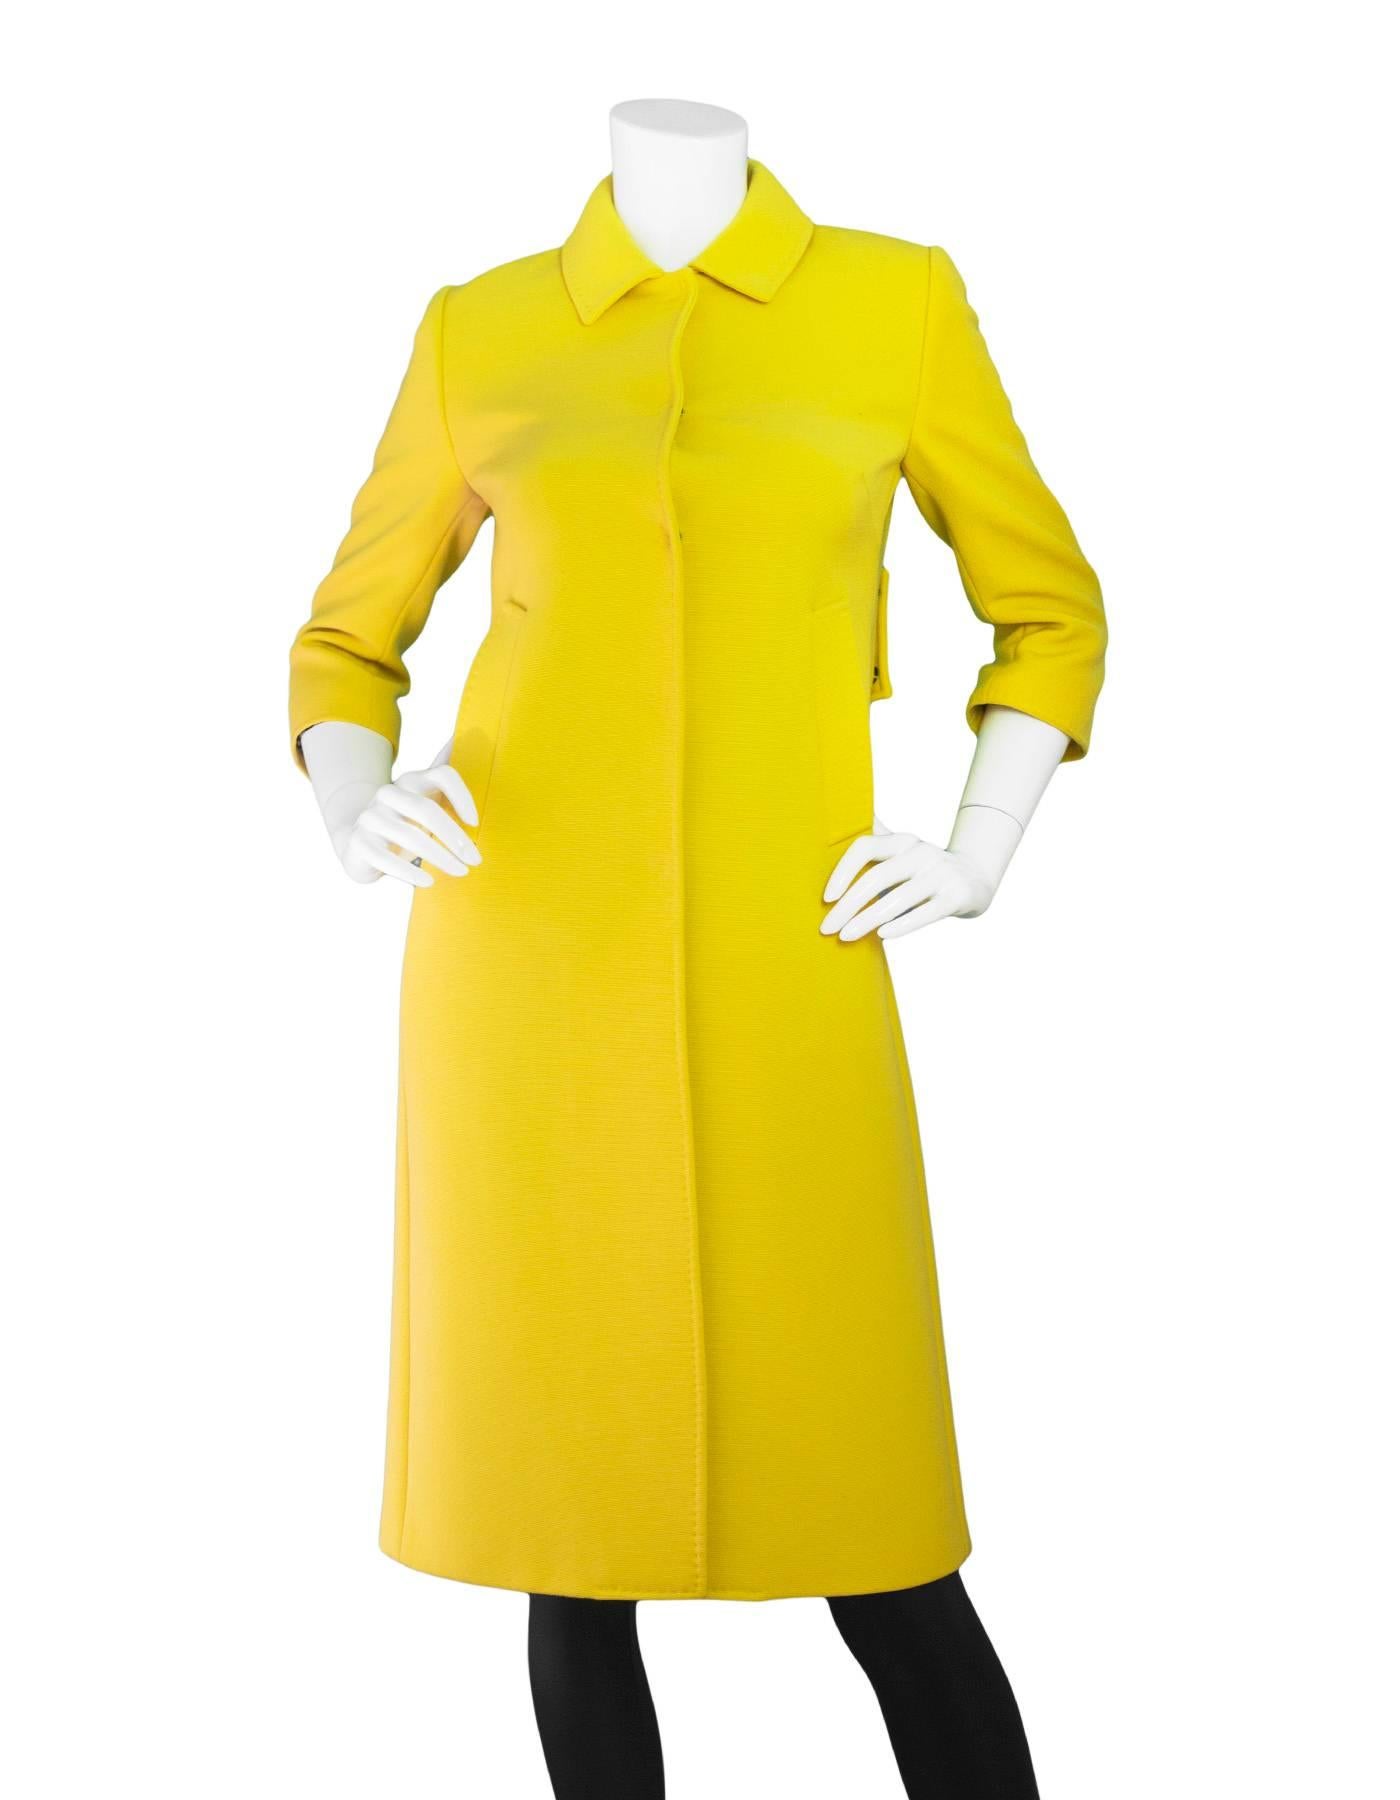 Dolce & Gabbana Yellow Wool Button Up Coat Sz IT40

Made In: Italy
Color: Yellow
Composition: 98% wool, 2% nylon
Lining: Leopard textile
Closure/Opening: Front double snap button closure
Overall Condition: Excellent pre-owned condition

Marked